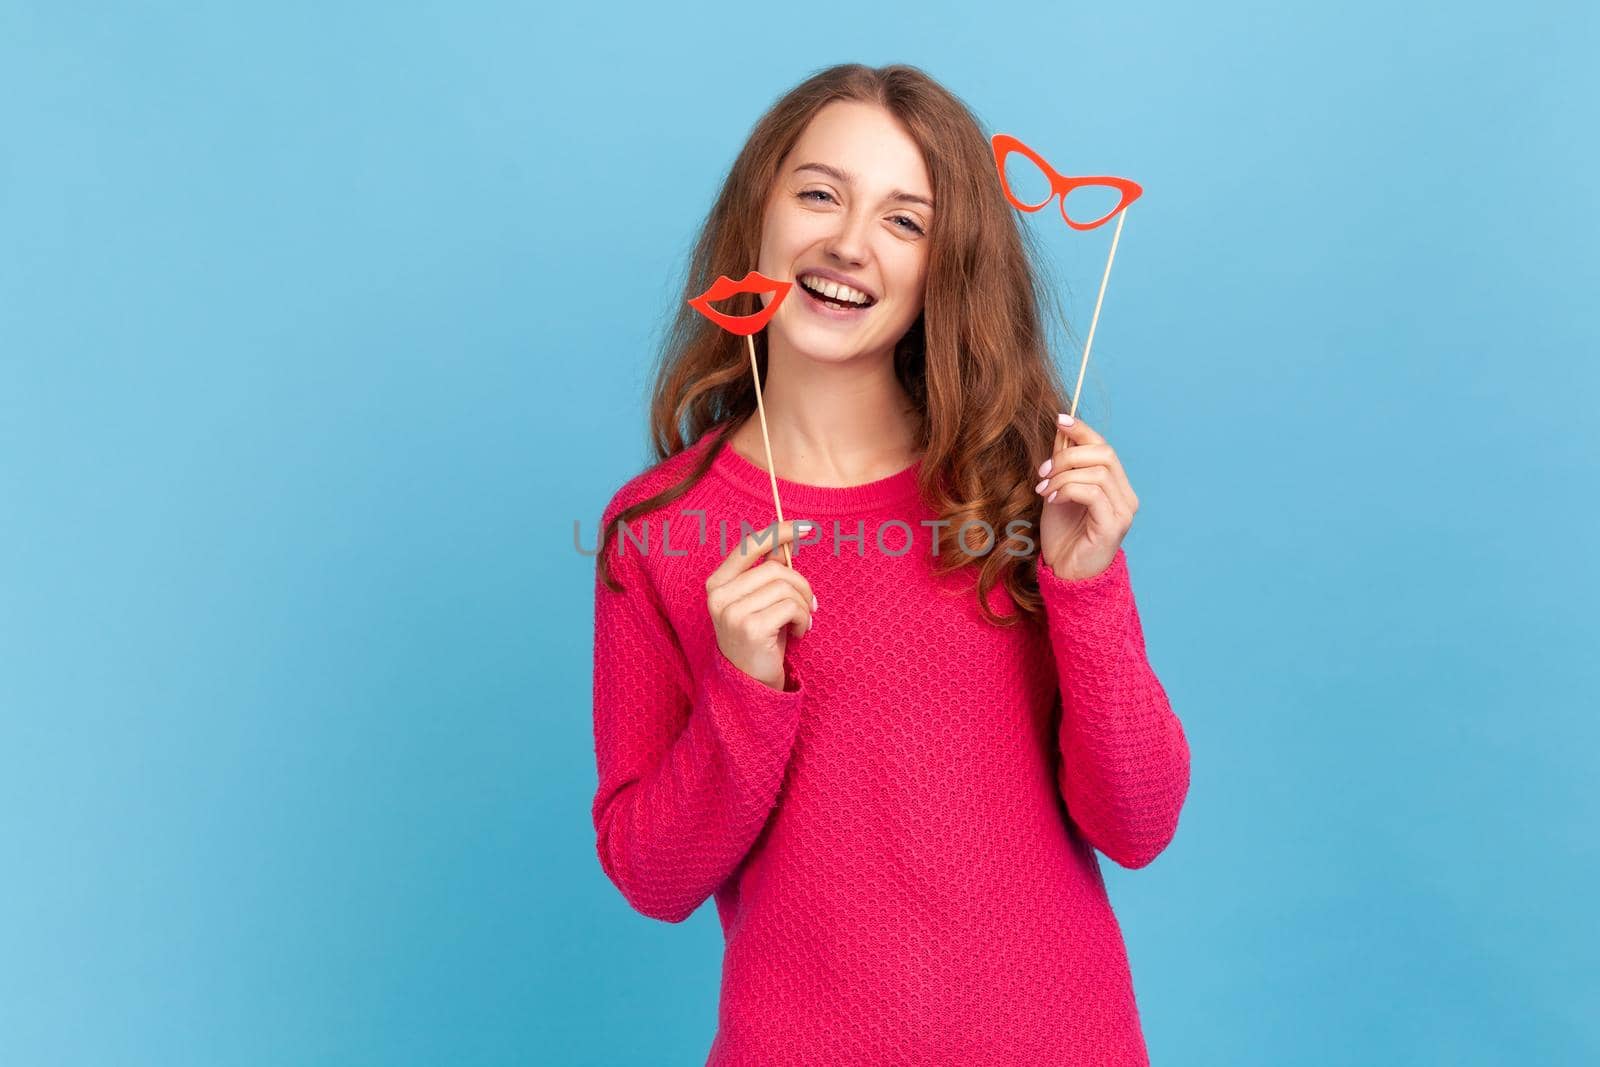 Attractive woman with festive mood, wearing pink pullover, holding party props, celebrating holiday, showing paper lips and glasses. Indoor studio shot isolated on blue background.